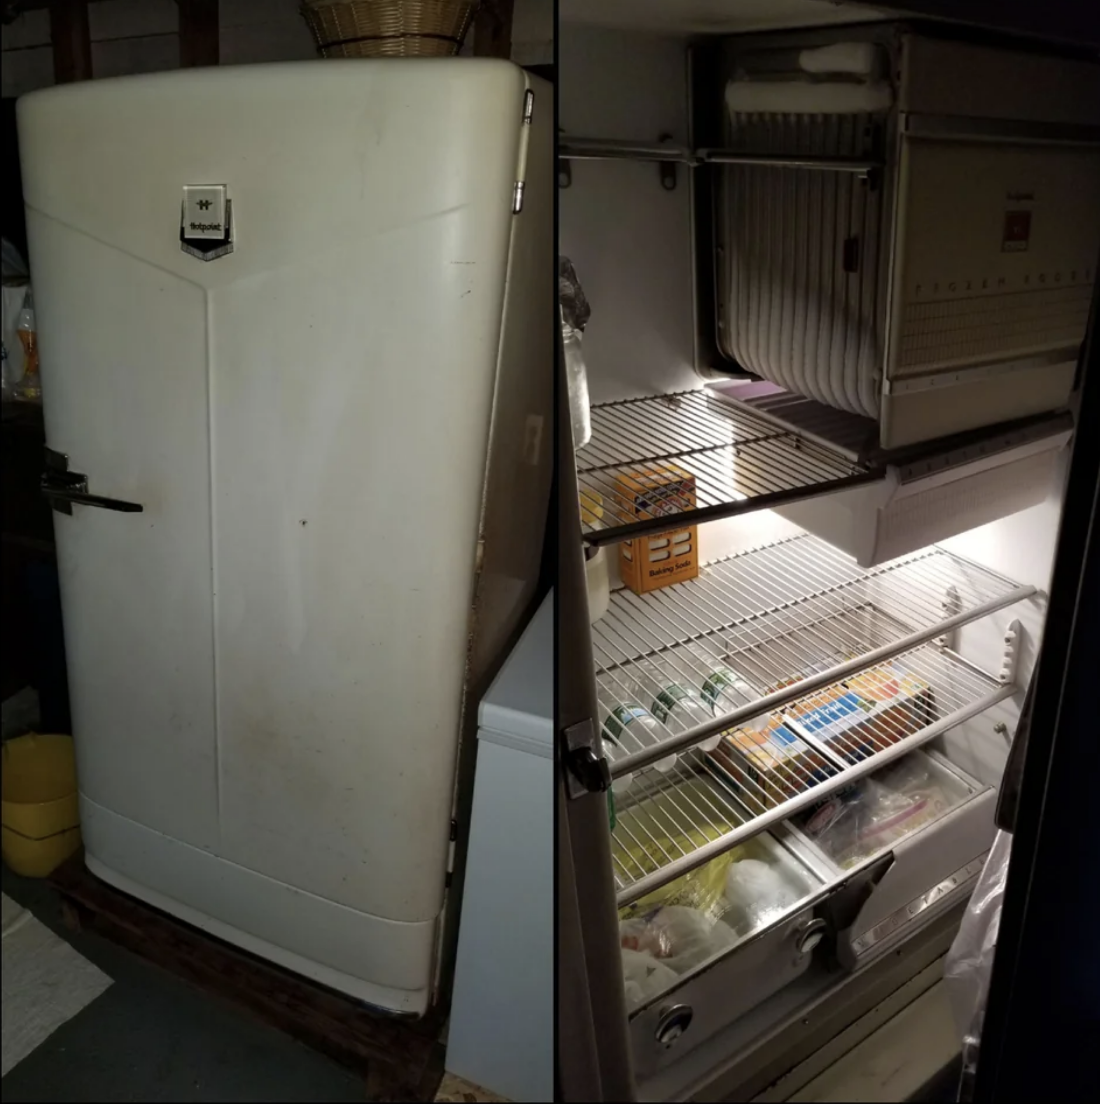 Old-style fridge in a dimly lit room, shown closed and open, revealing its interior with some food items